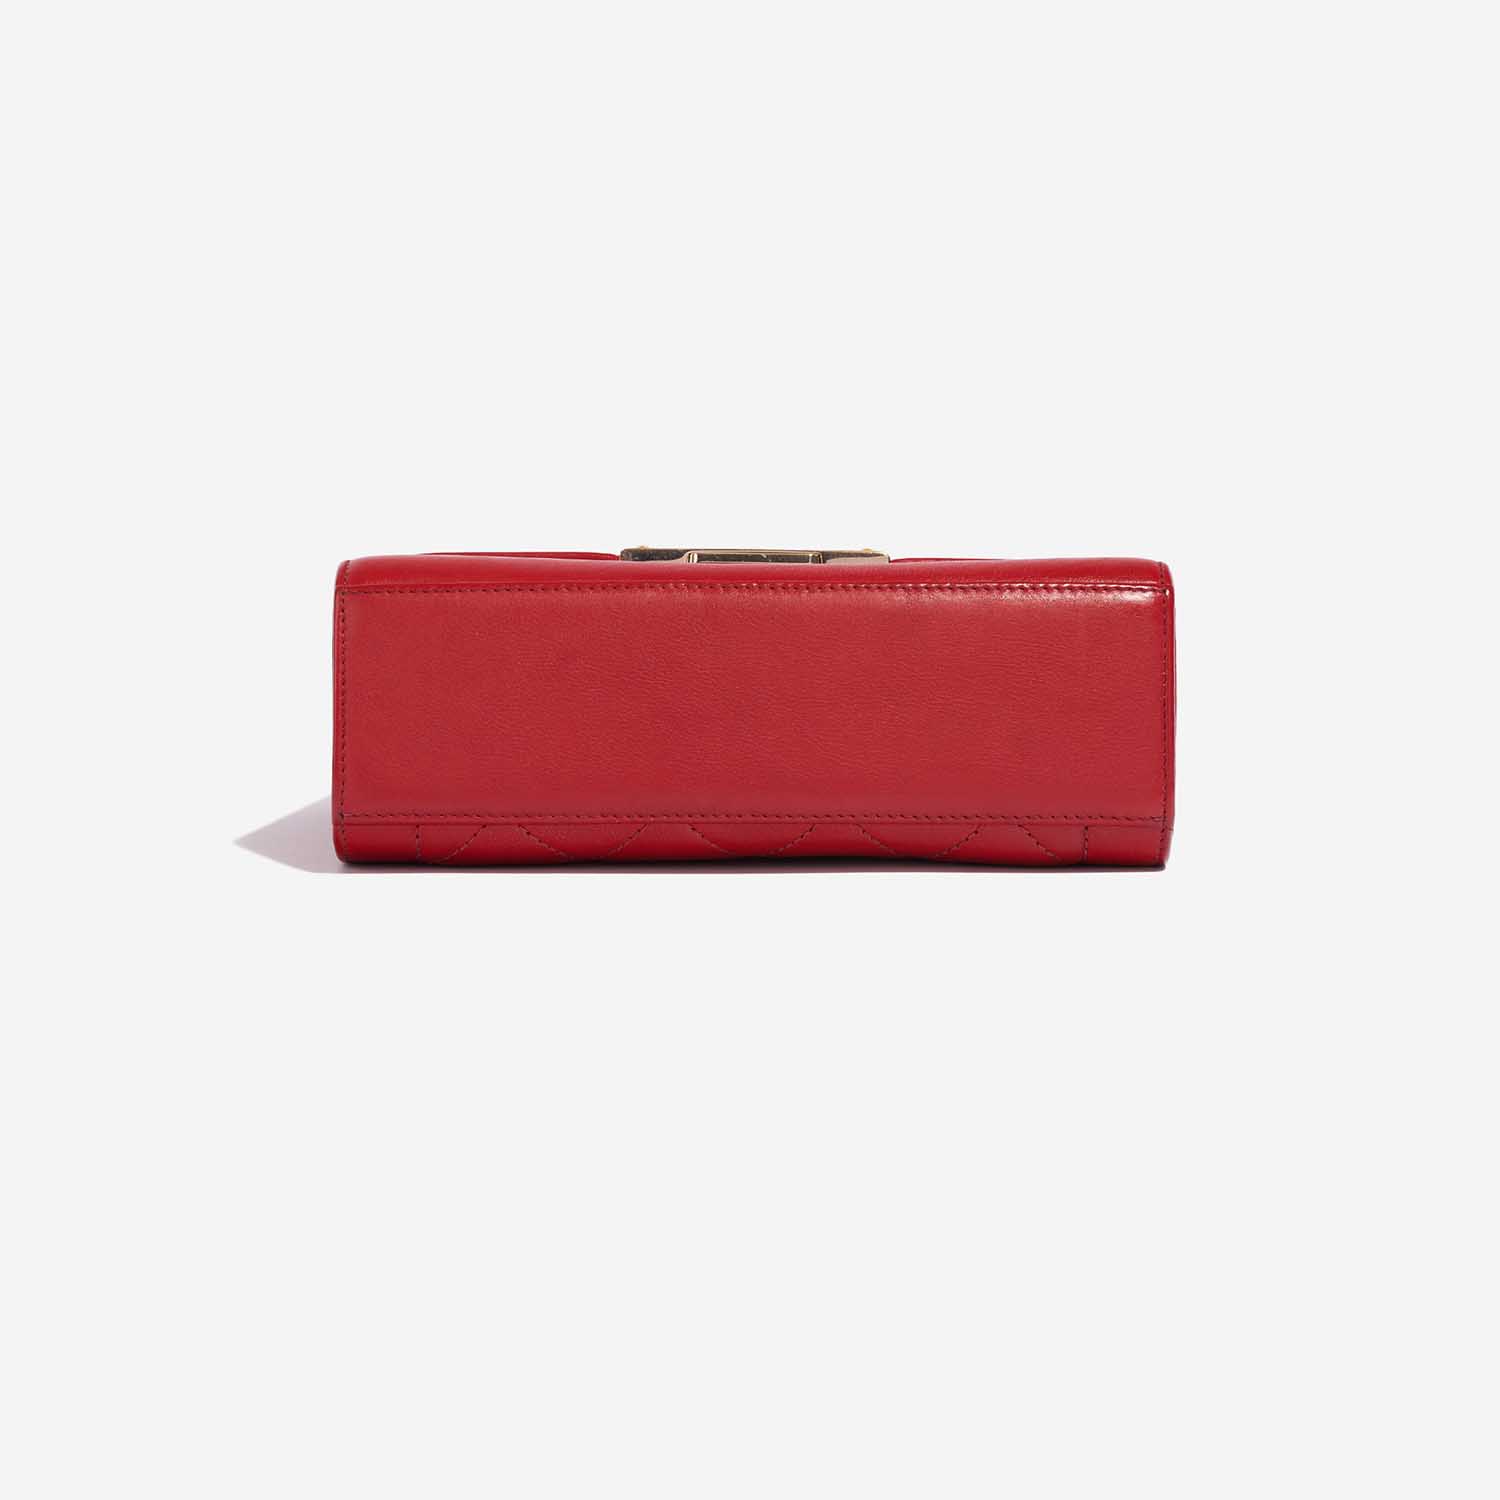 Pre-owned Chanel bag Flap Bag Handle Lamb Red Red Bottom | Sell your designer bag on Saclab.com